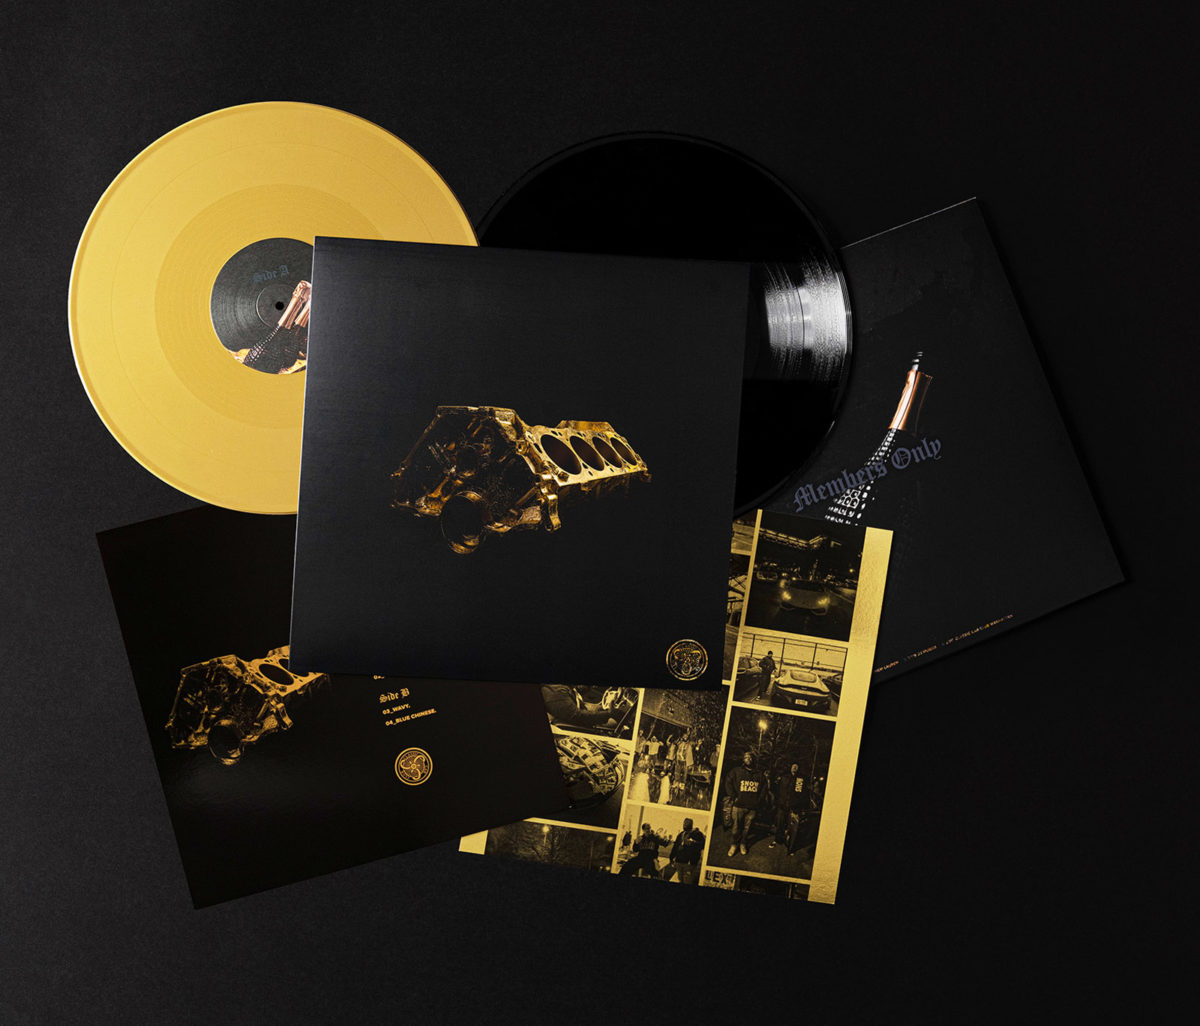 A photograph of a vinyl packaging including the outer sleeve, 2 vinyl discs and 2 inserts.